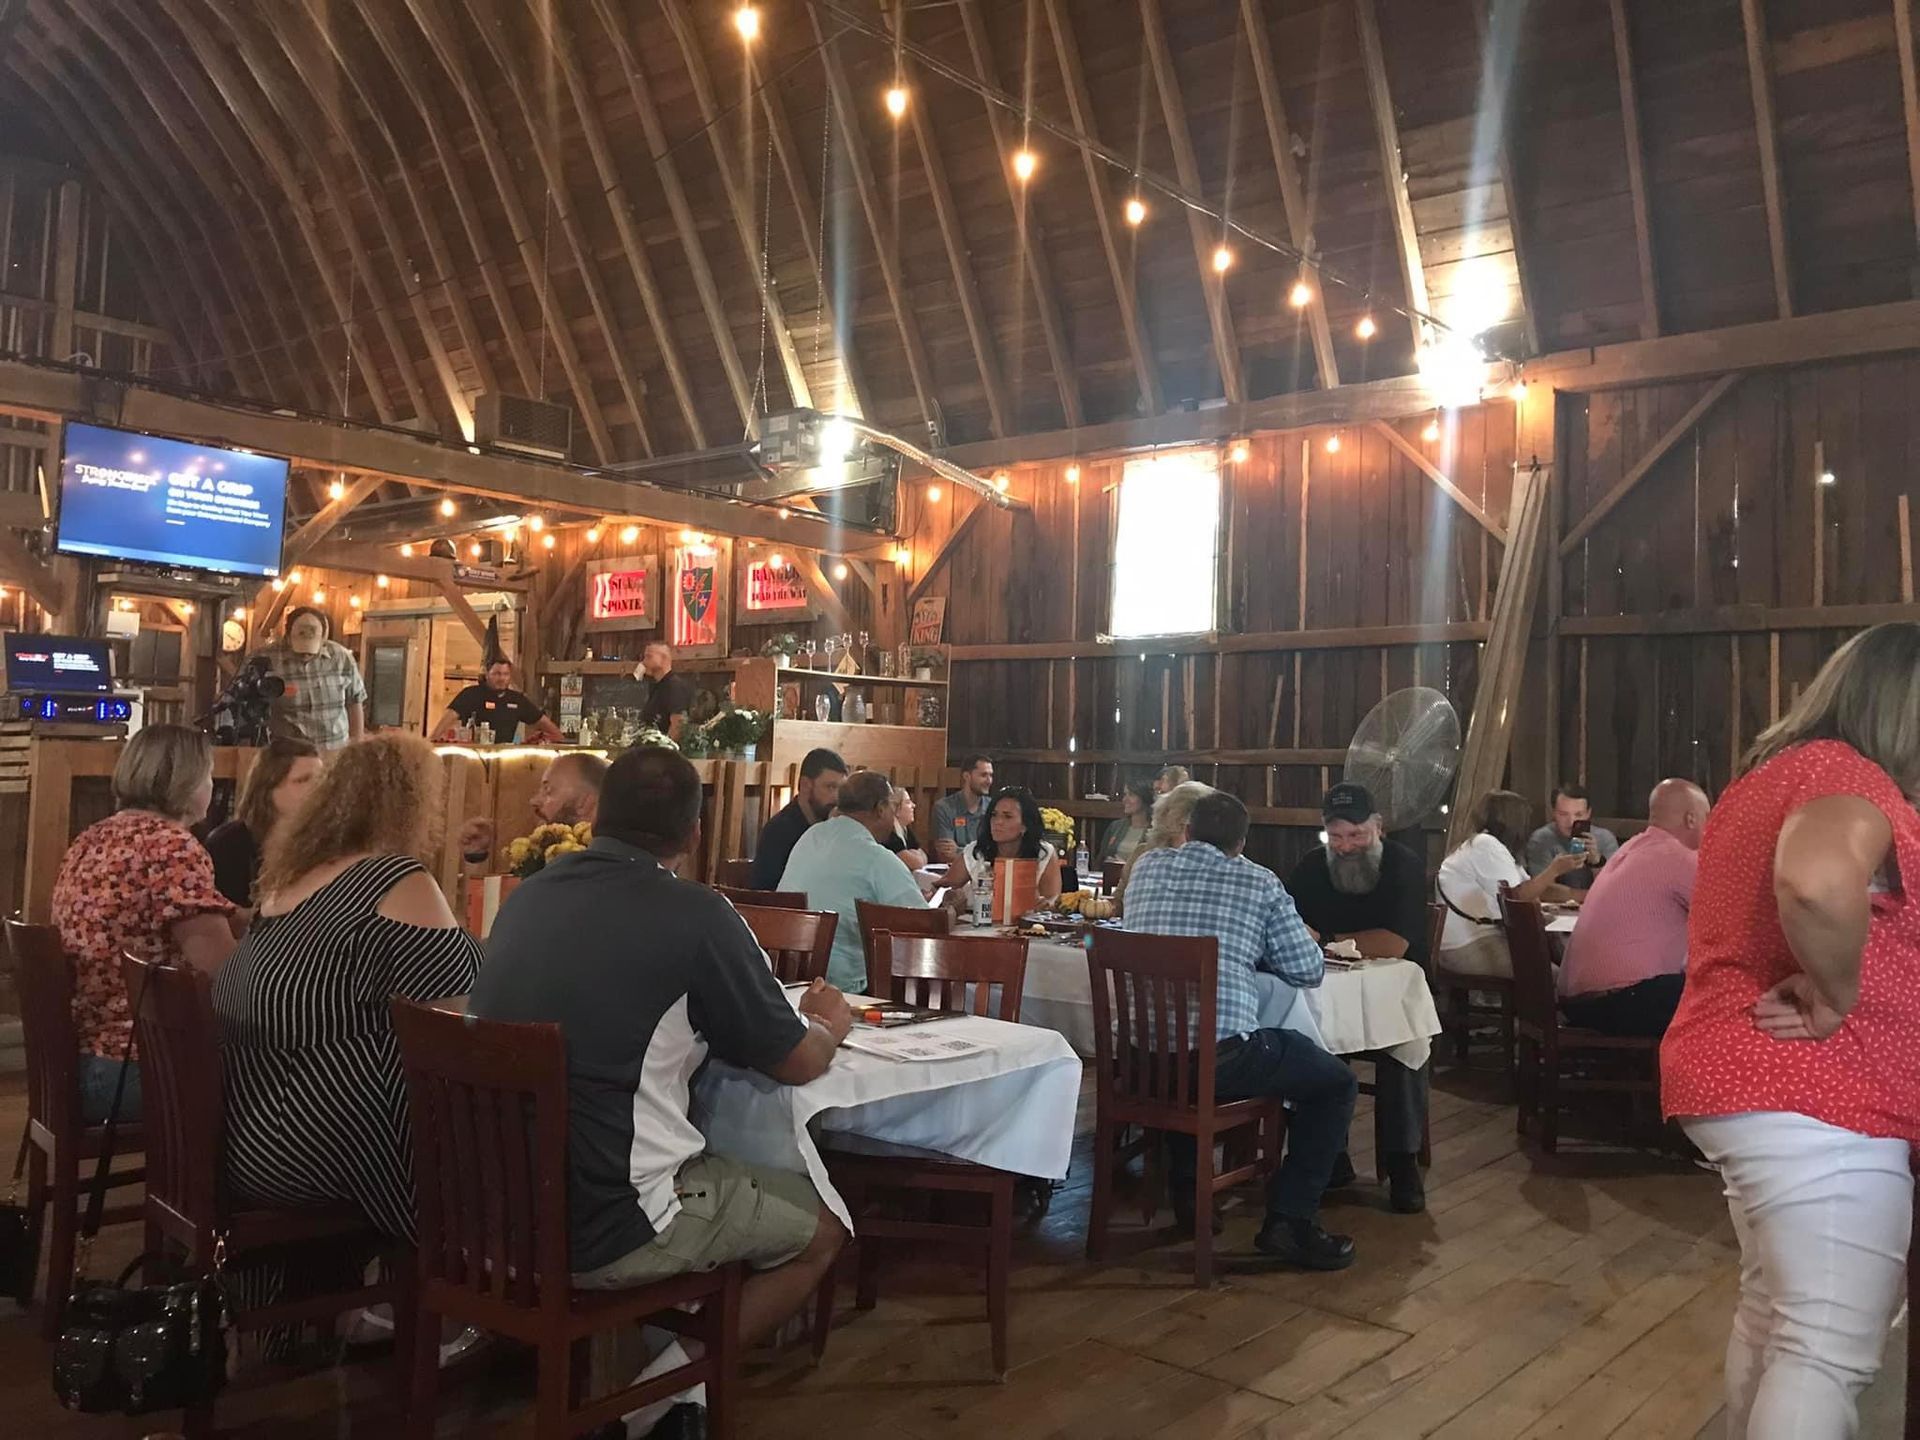 A group of people are sitting at tables in a barn